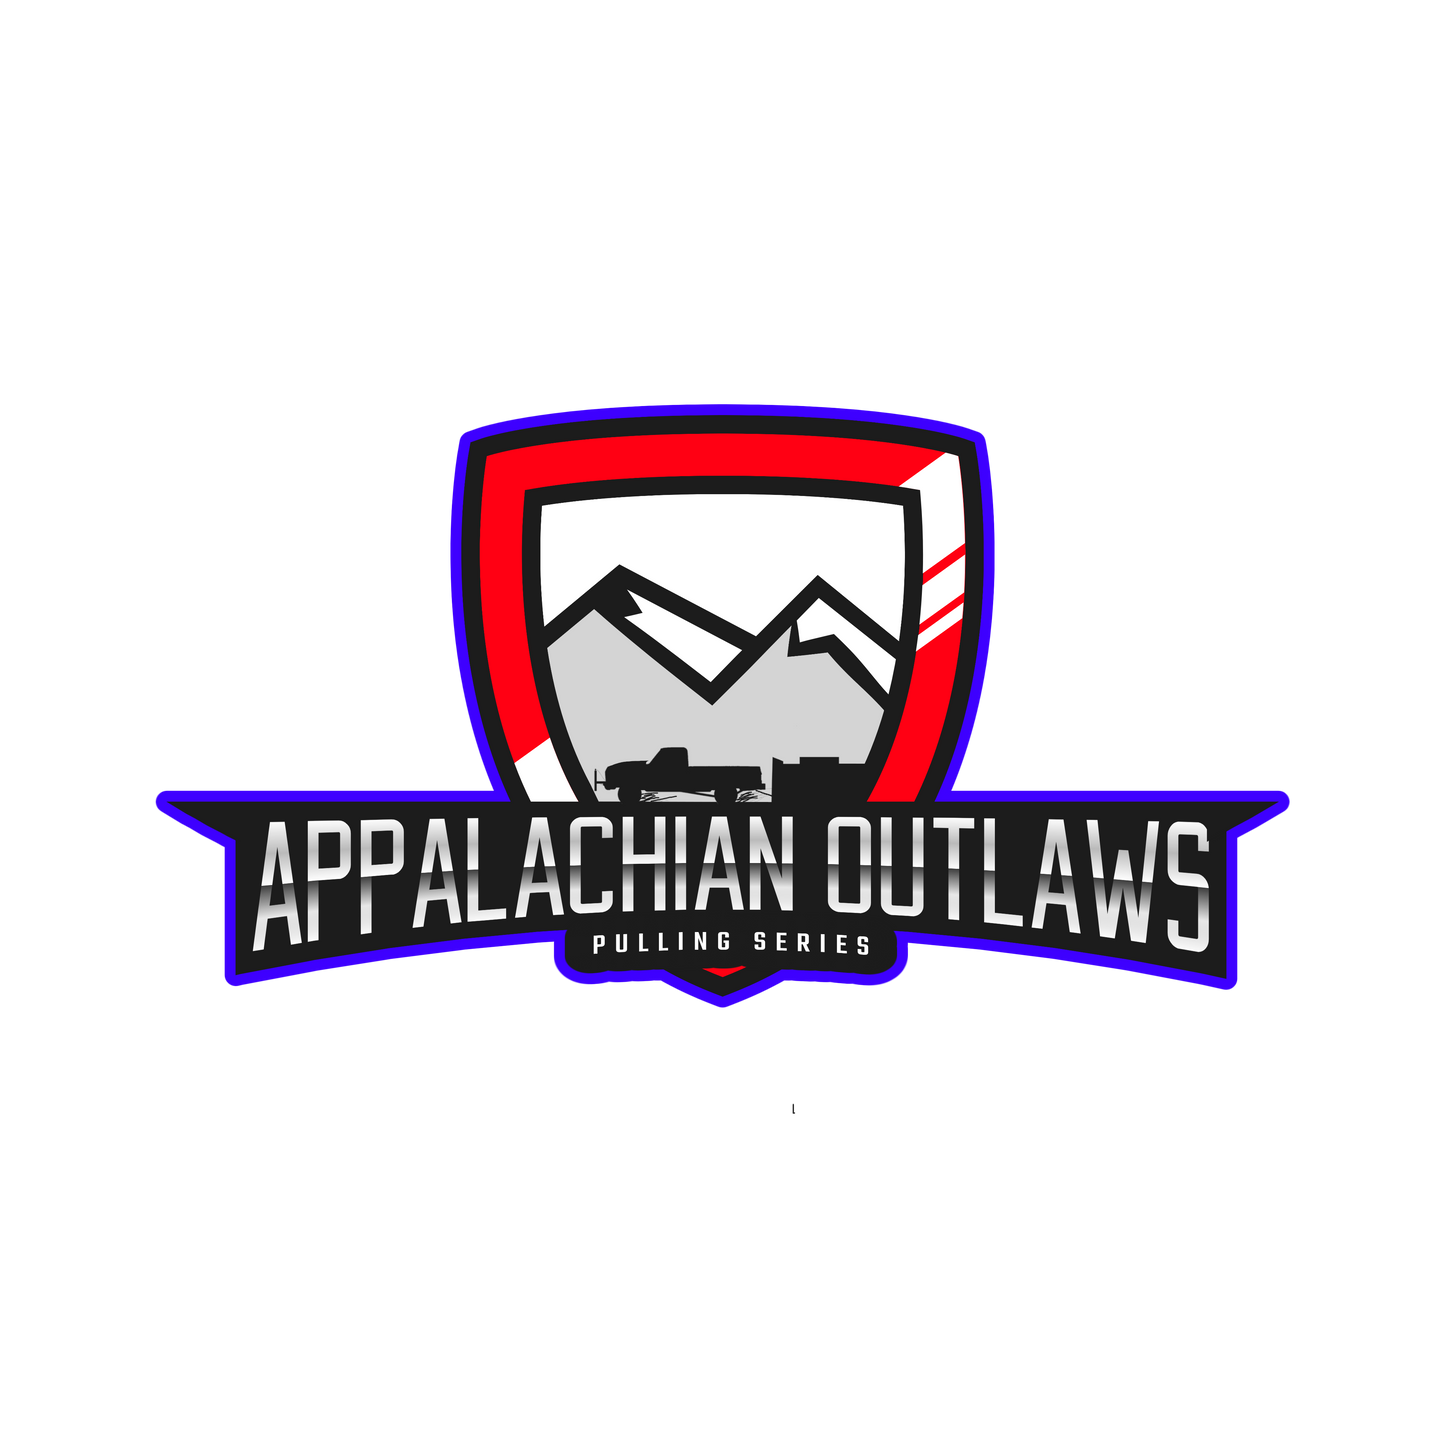 Appalachian Outlaws Pulling Series Logo Decal